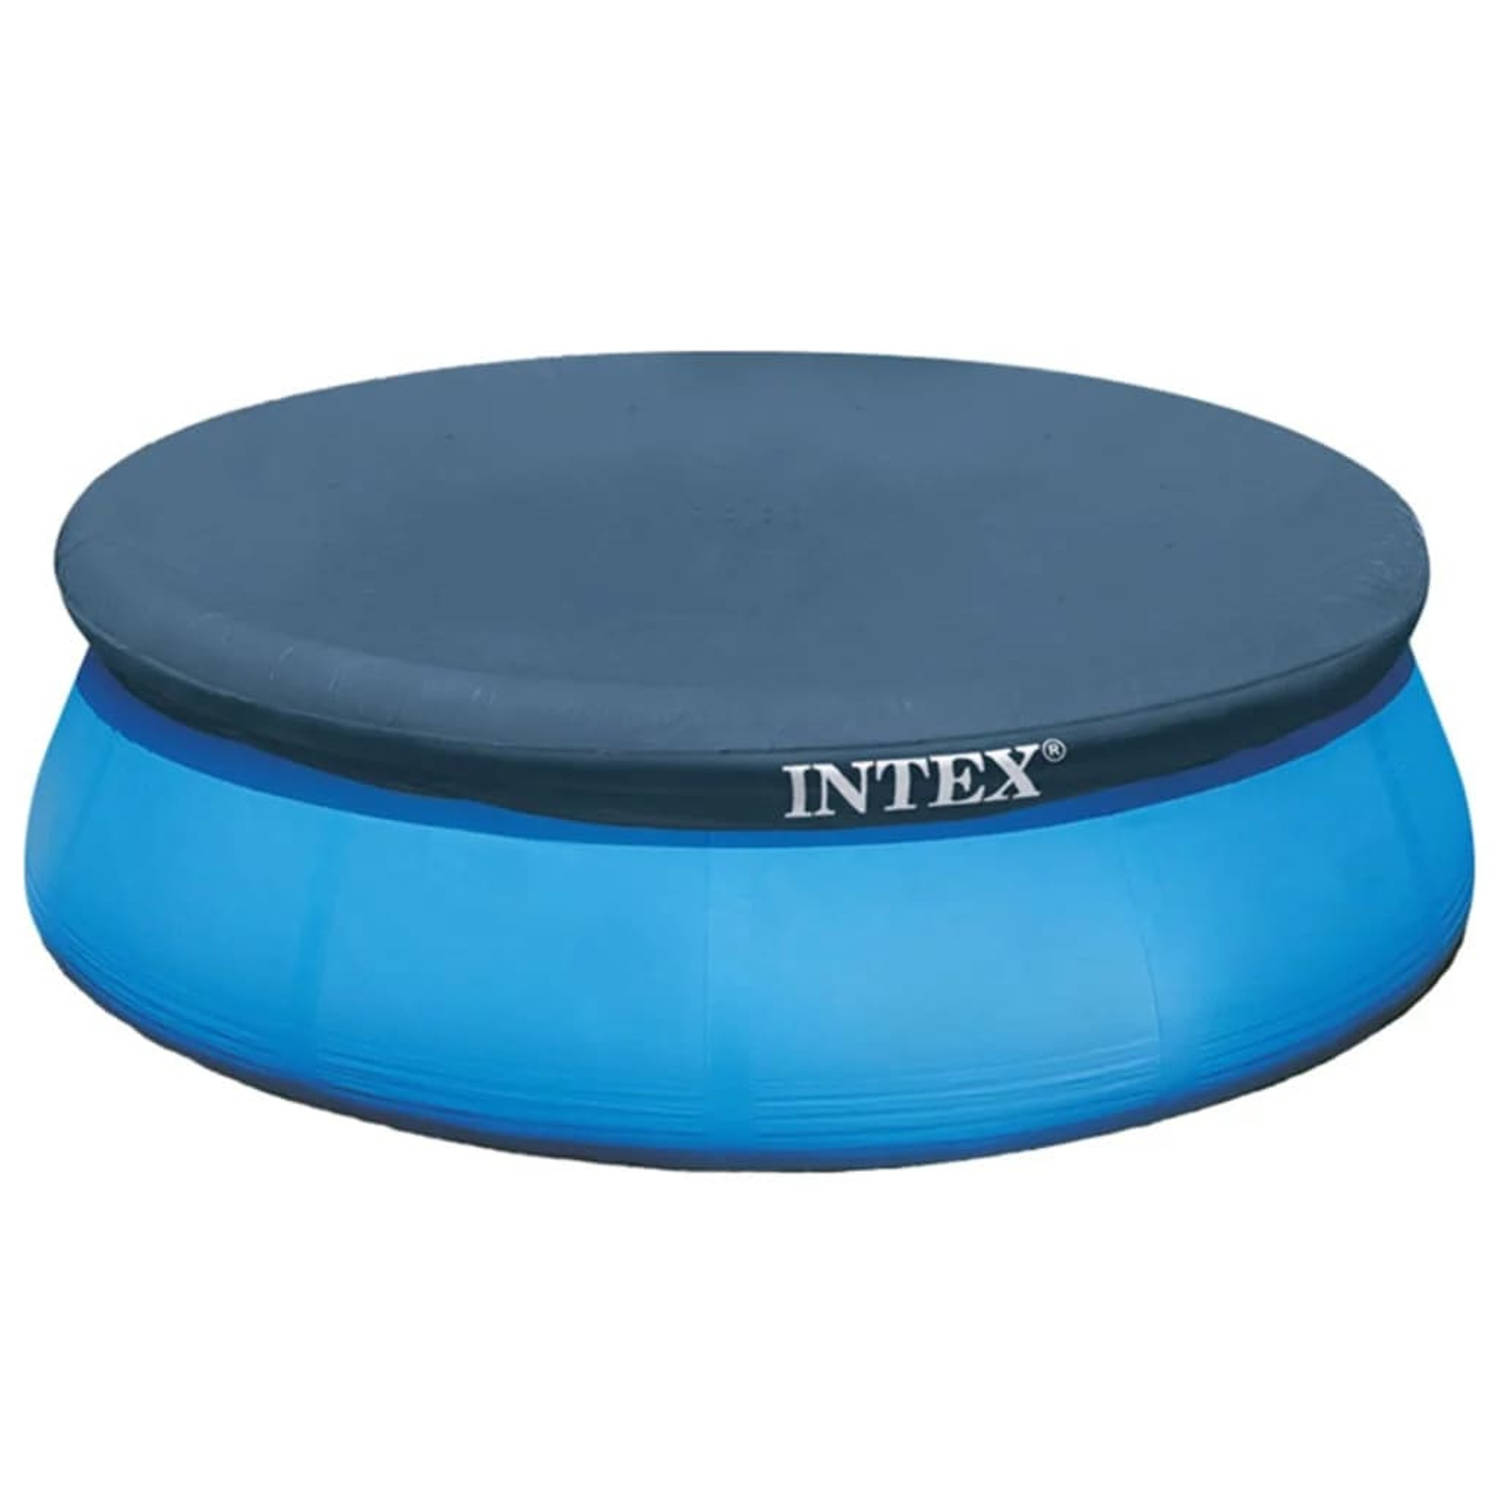 Intex Zwembadhoes rond 366 cm 28022